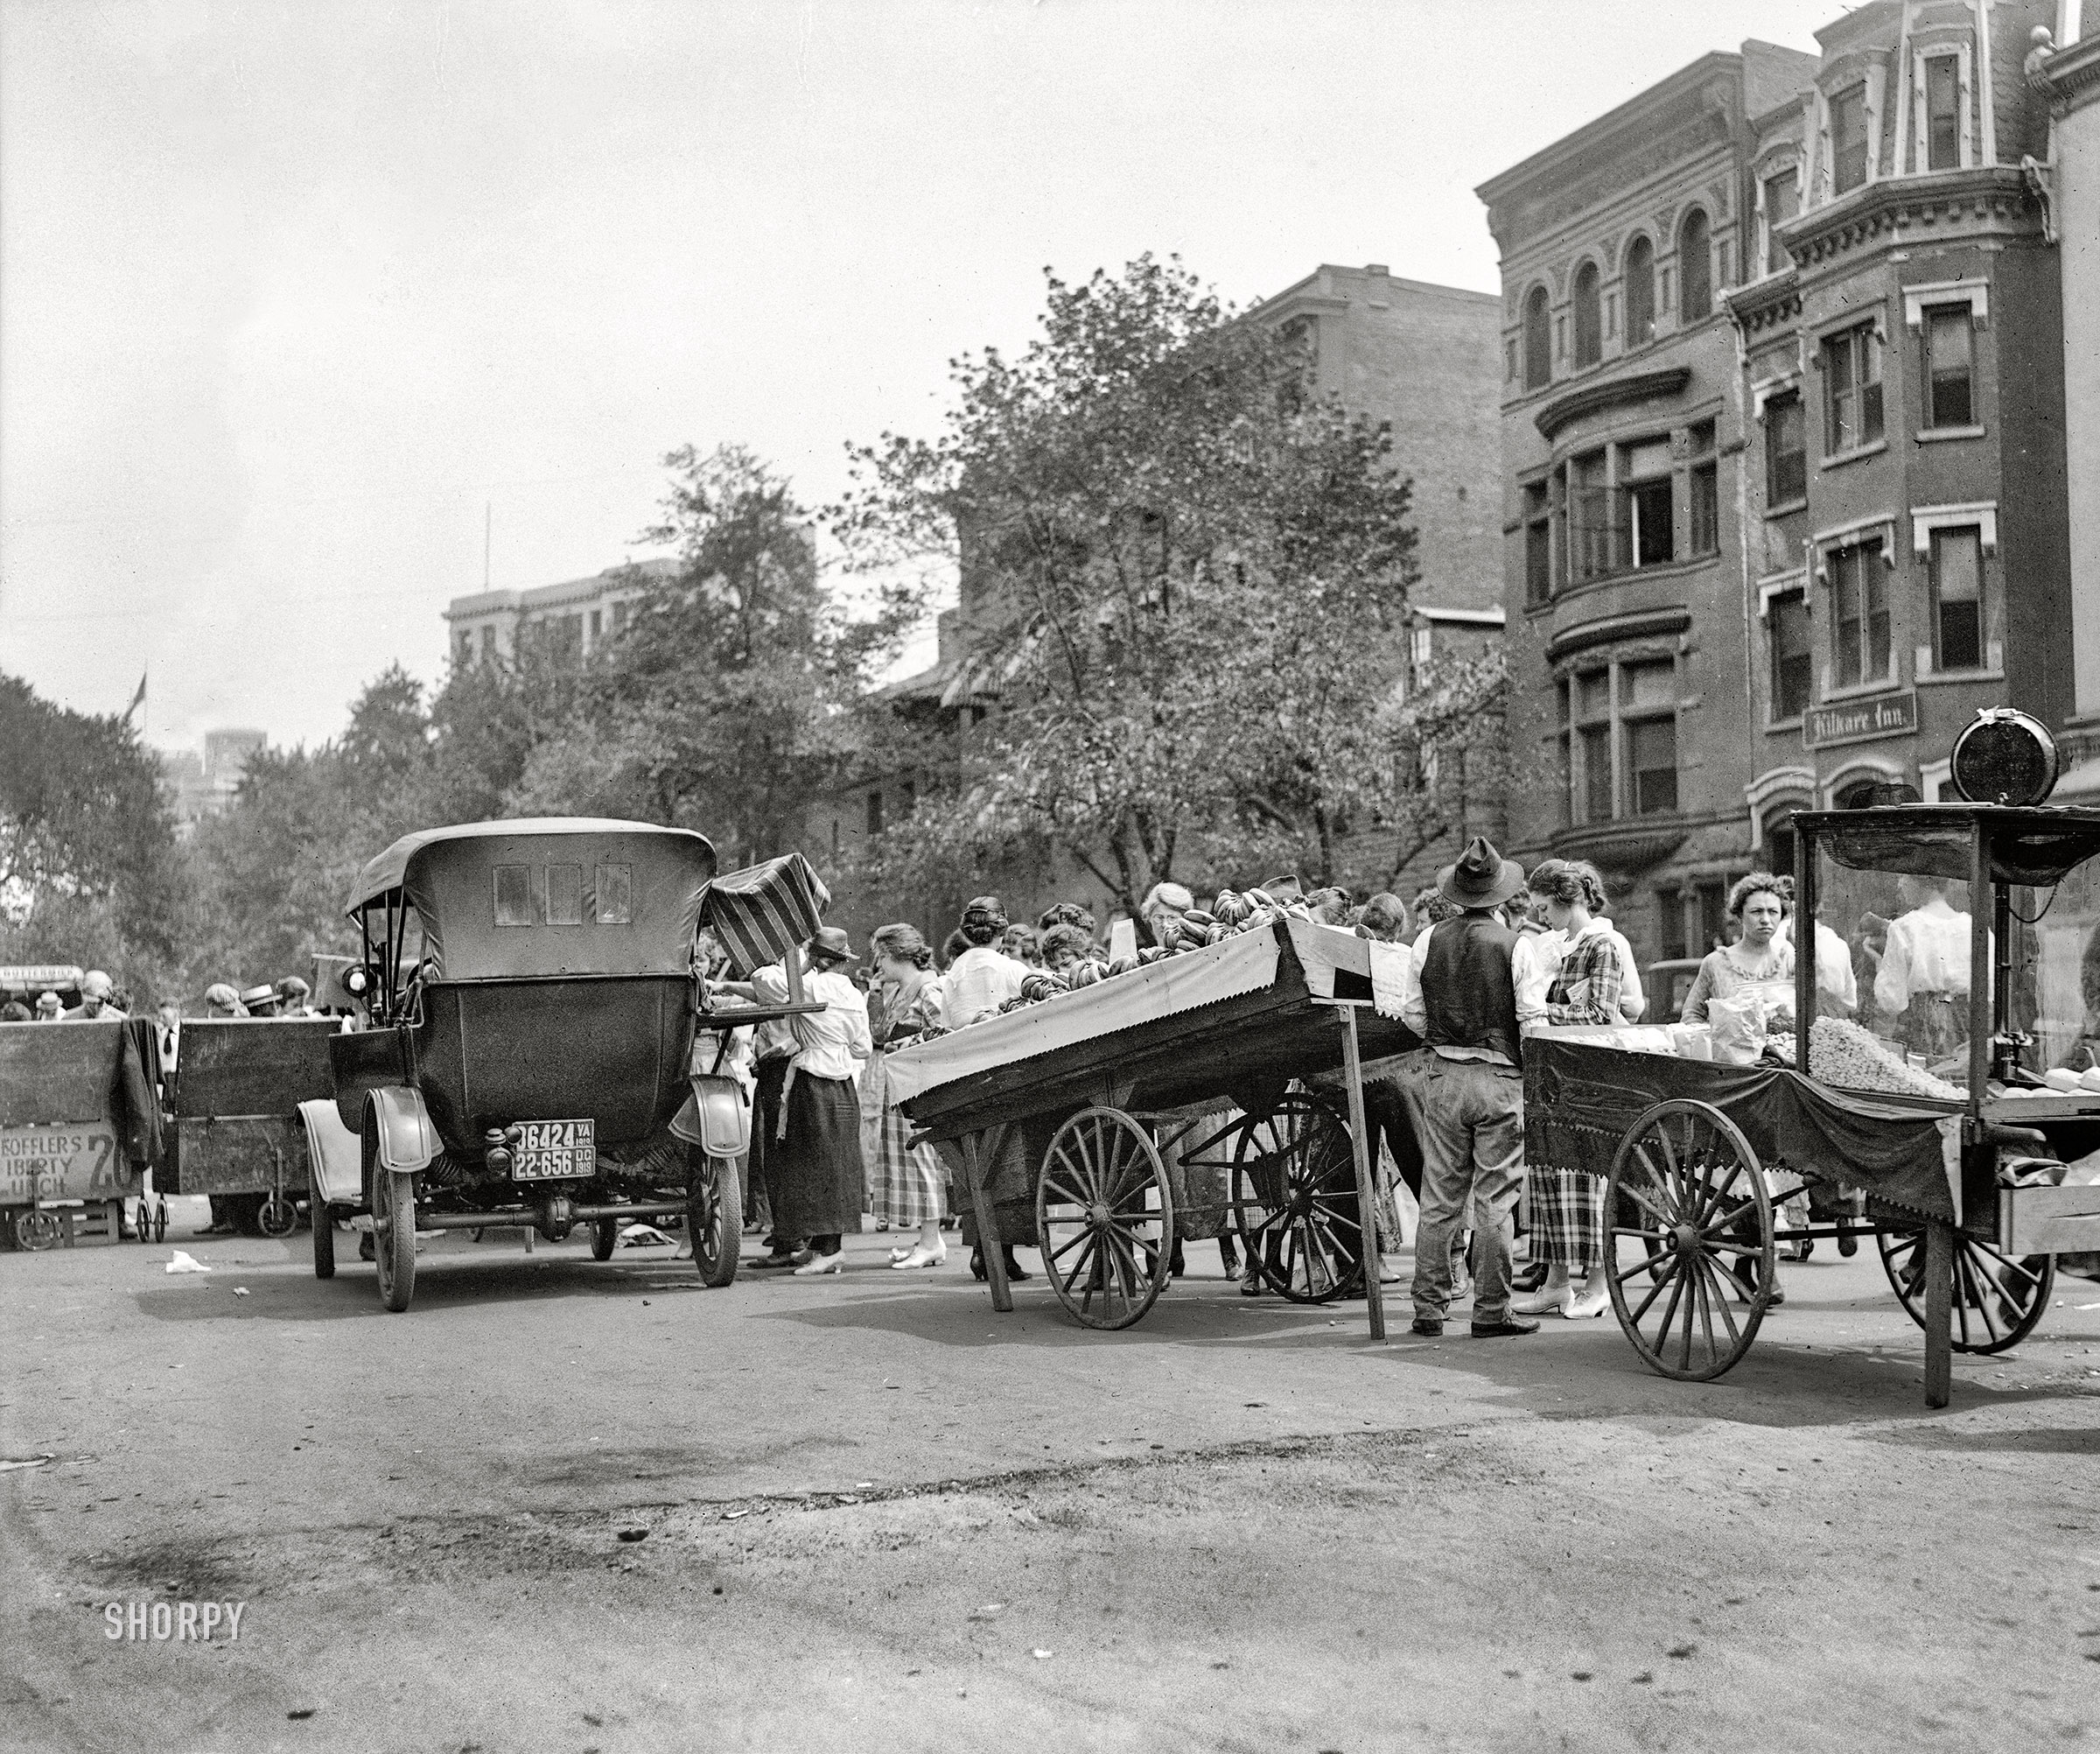 Washington, D.C., 1919. "Lunch vendors, Treasury Annex." At left, Leoffler's Liberty Lunch for 20 cents. And yes, we have bananas. 4x5 glass negative, National Photo Co. View full size.